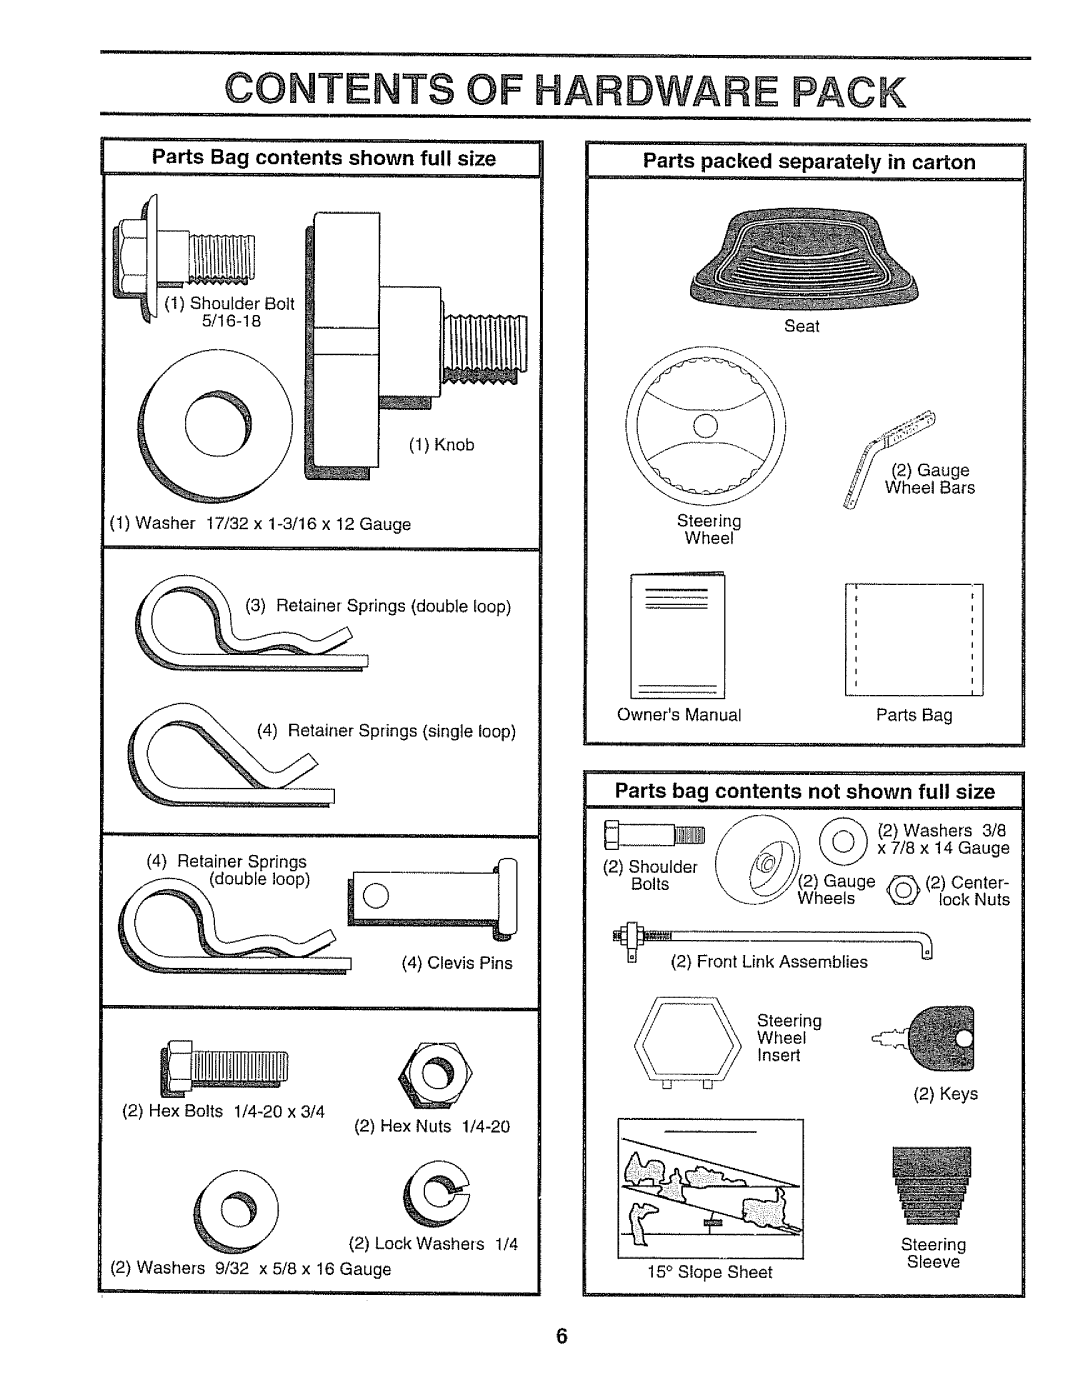 Sears 917.250551 manual Contents Of Hardware Pack, Parts Bag contents shown full size, Parts packed separately in carton 